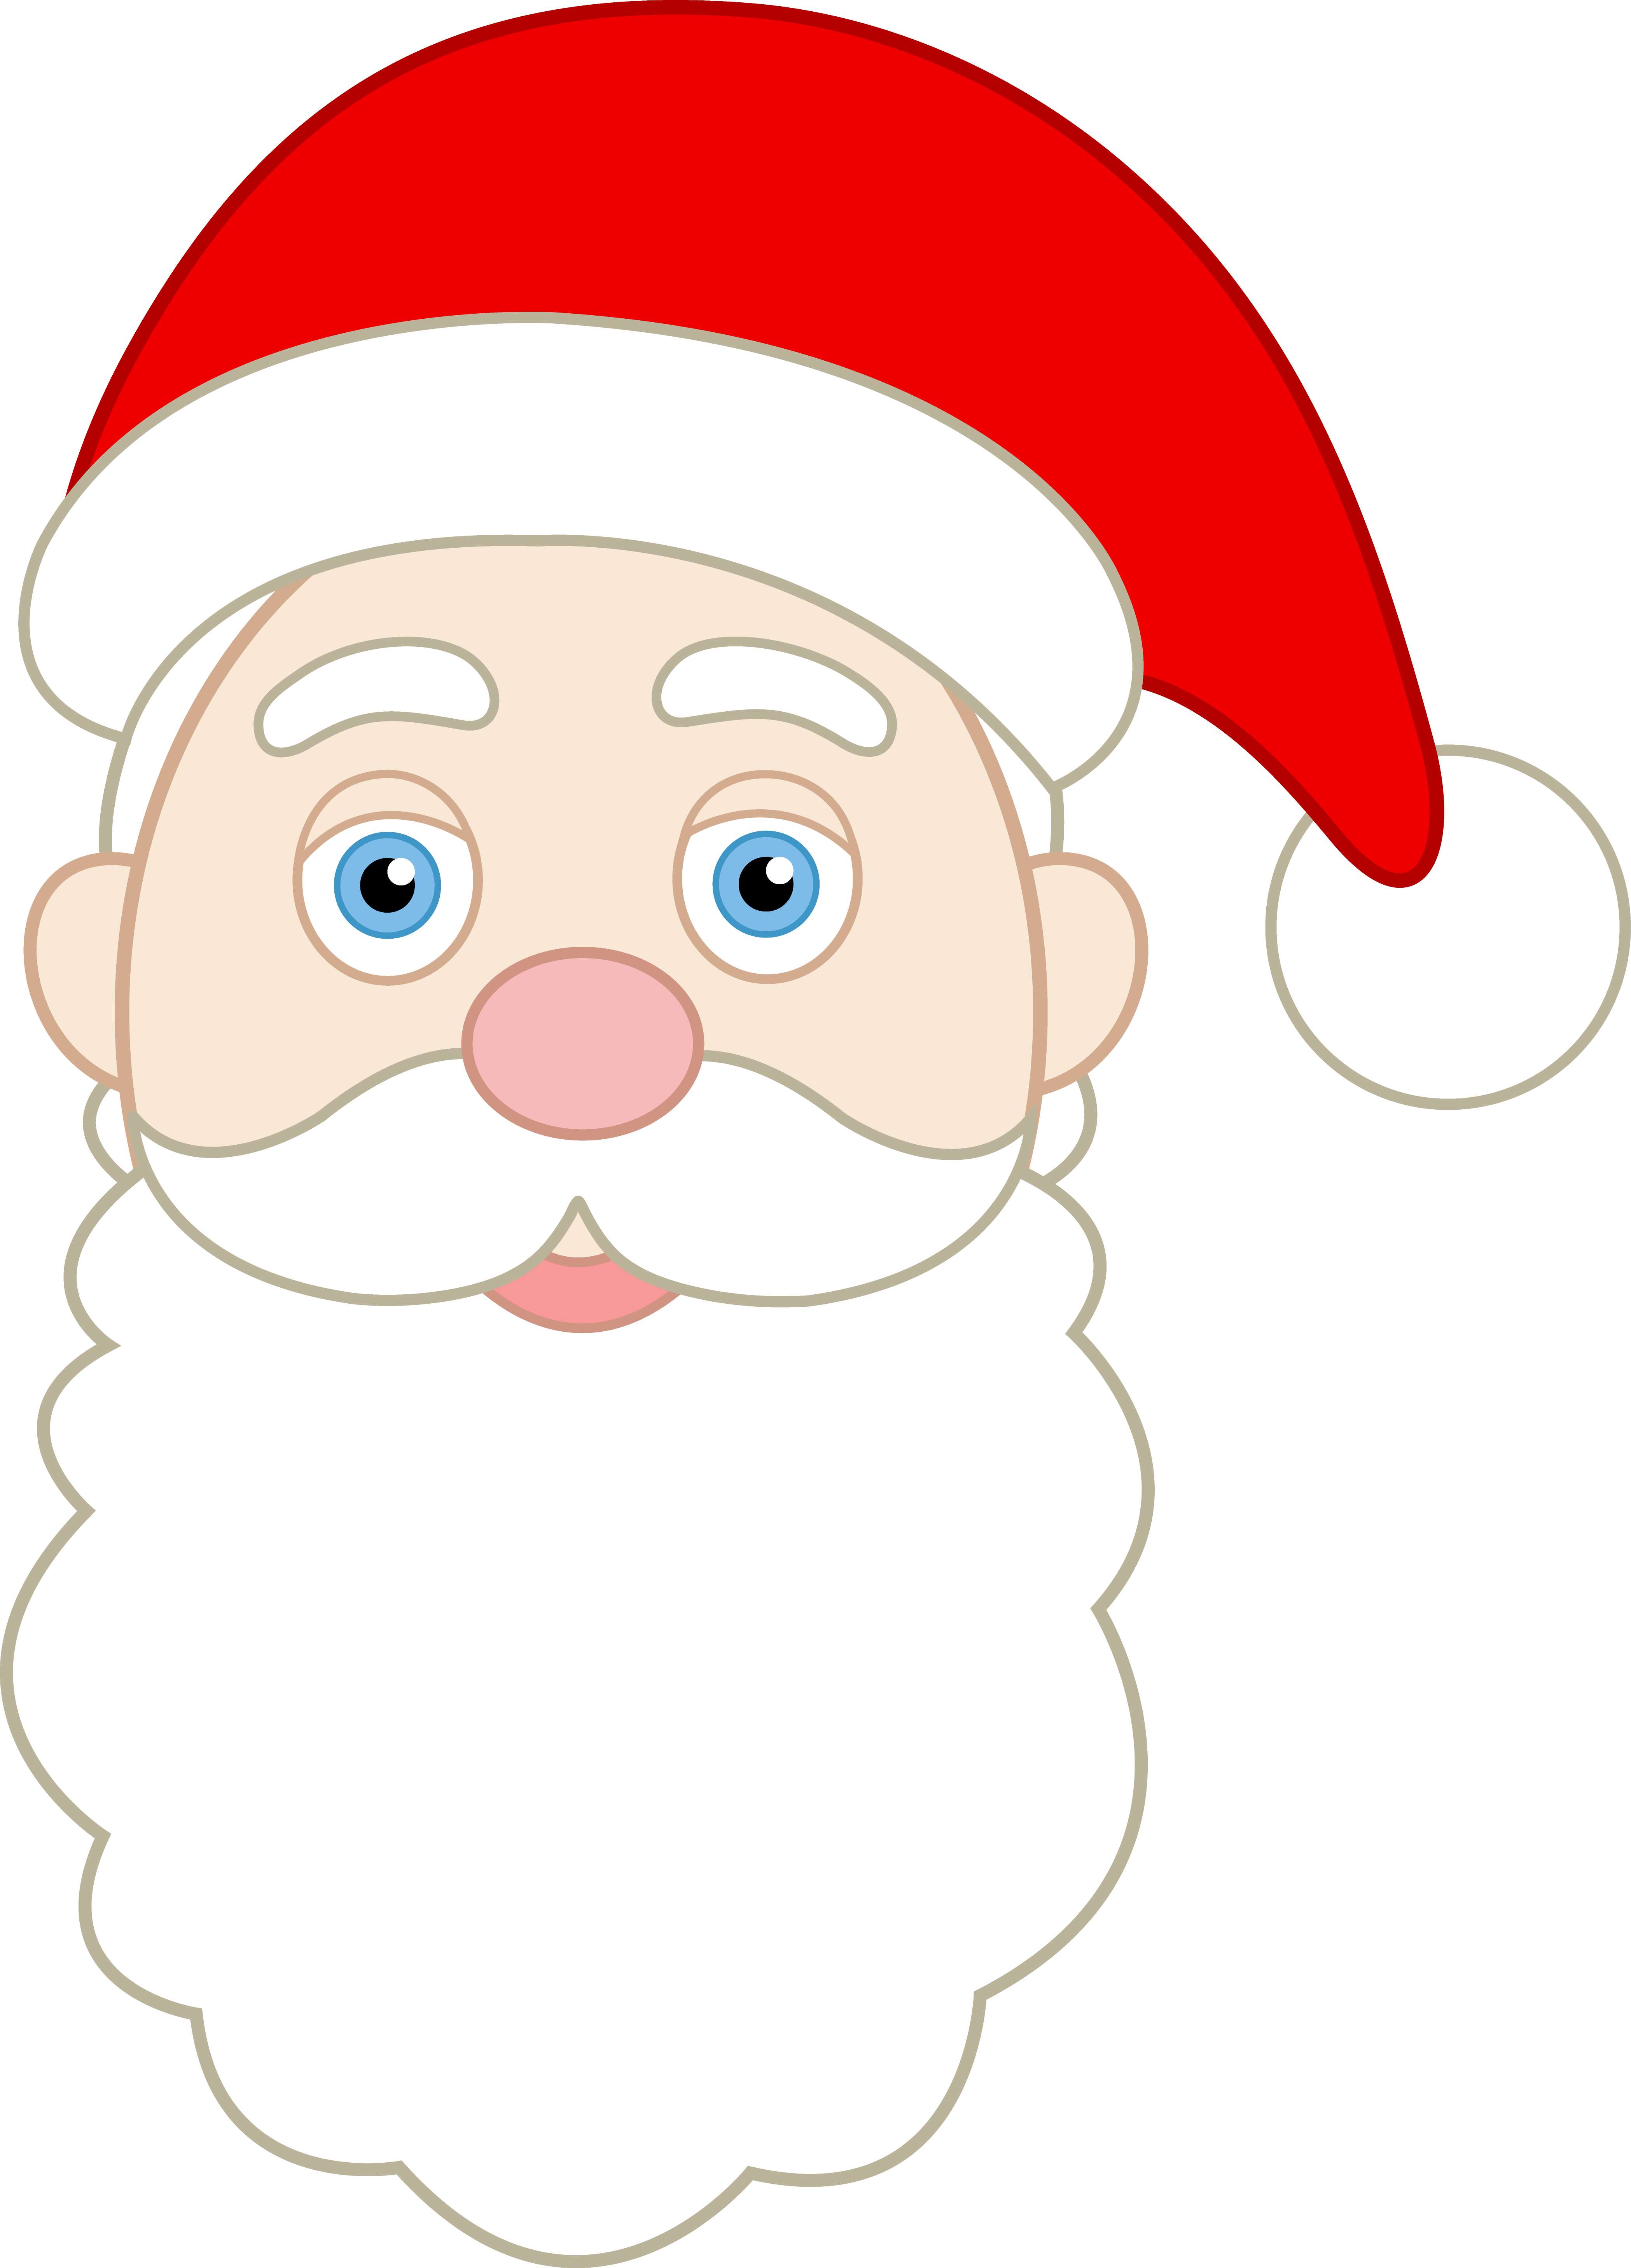 Santa Claus Beard Clip Art Images  Pictures - Becuo